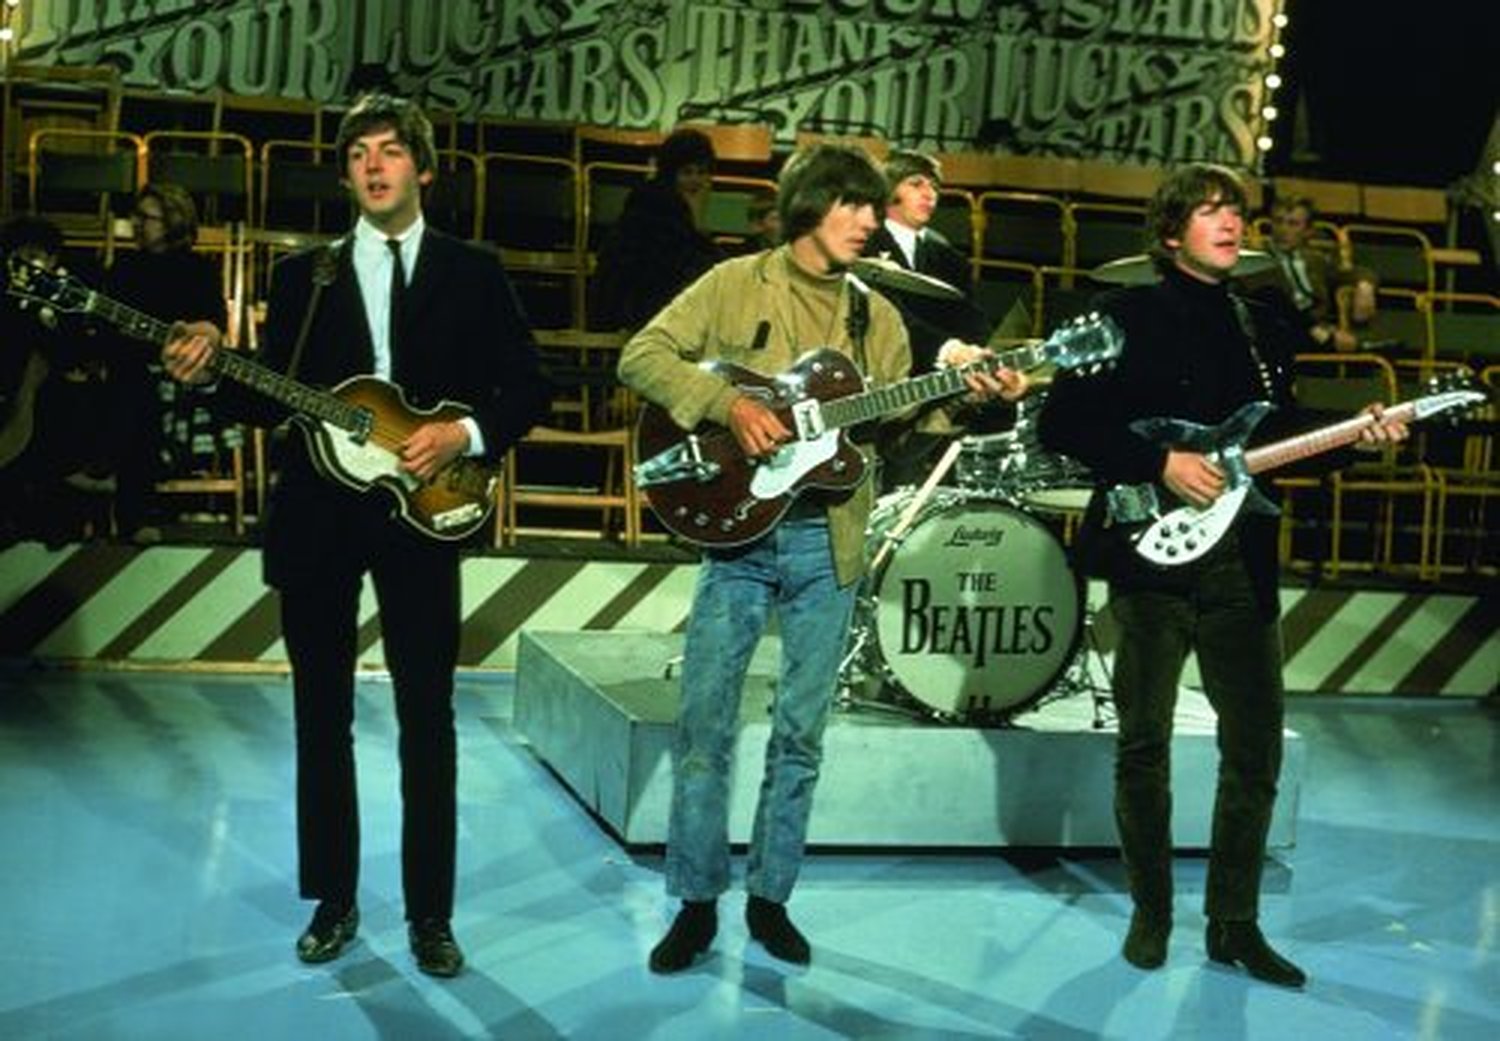 The Beatles Come Together On Stage Band Group Photograph Image Postcard